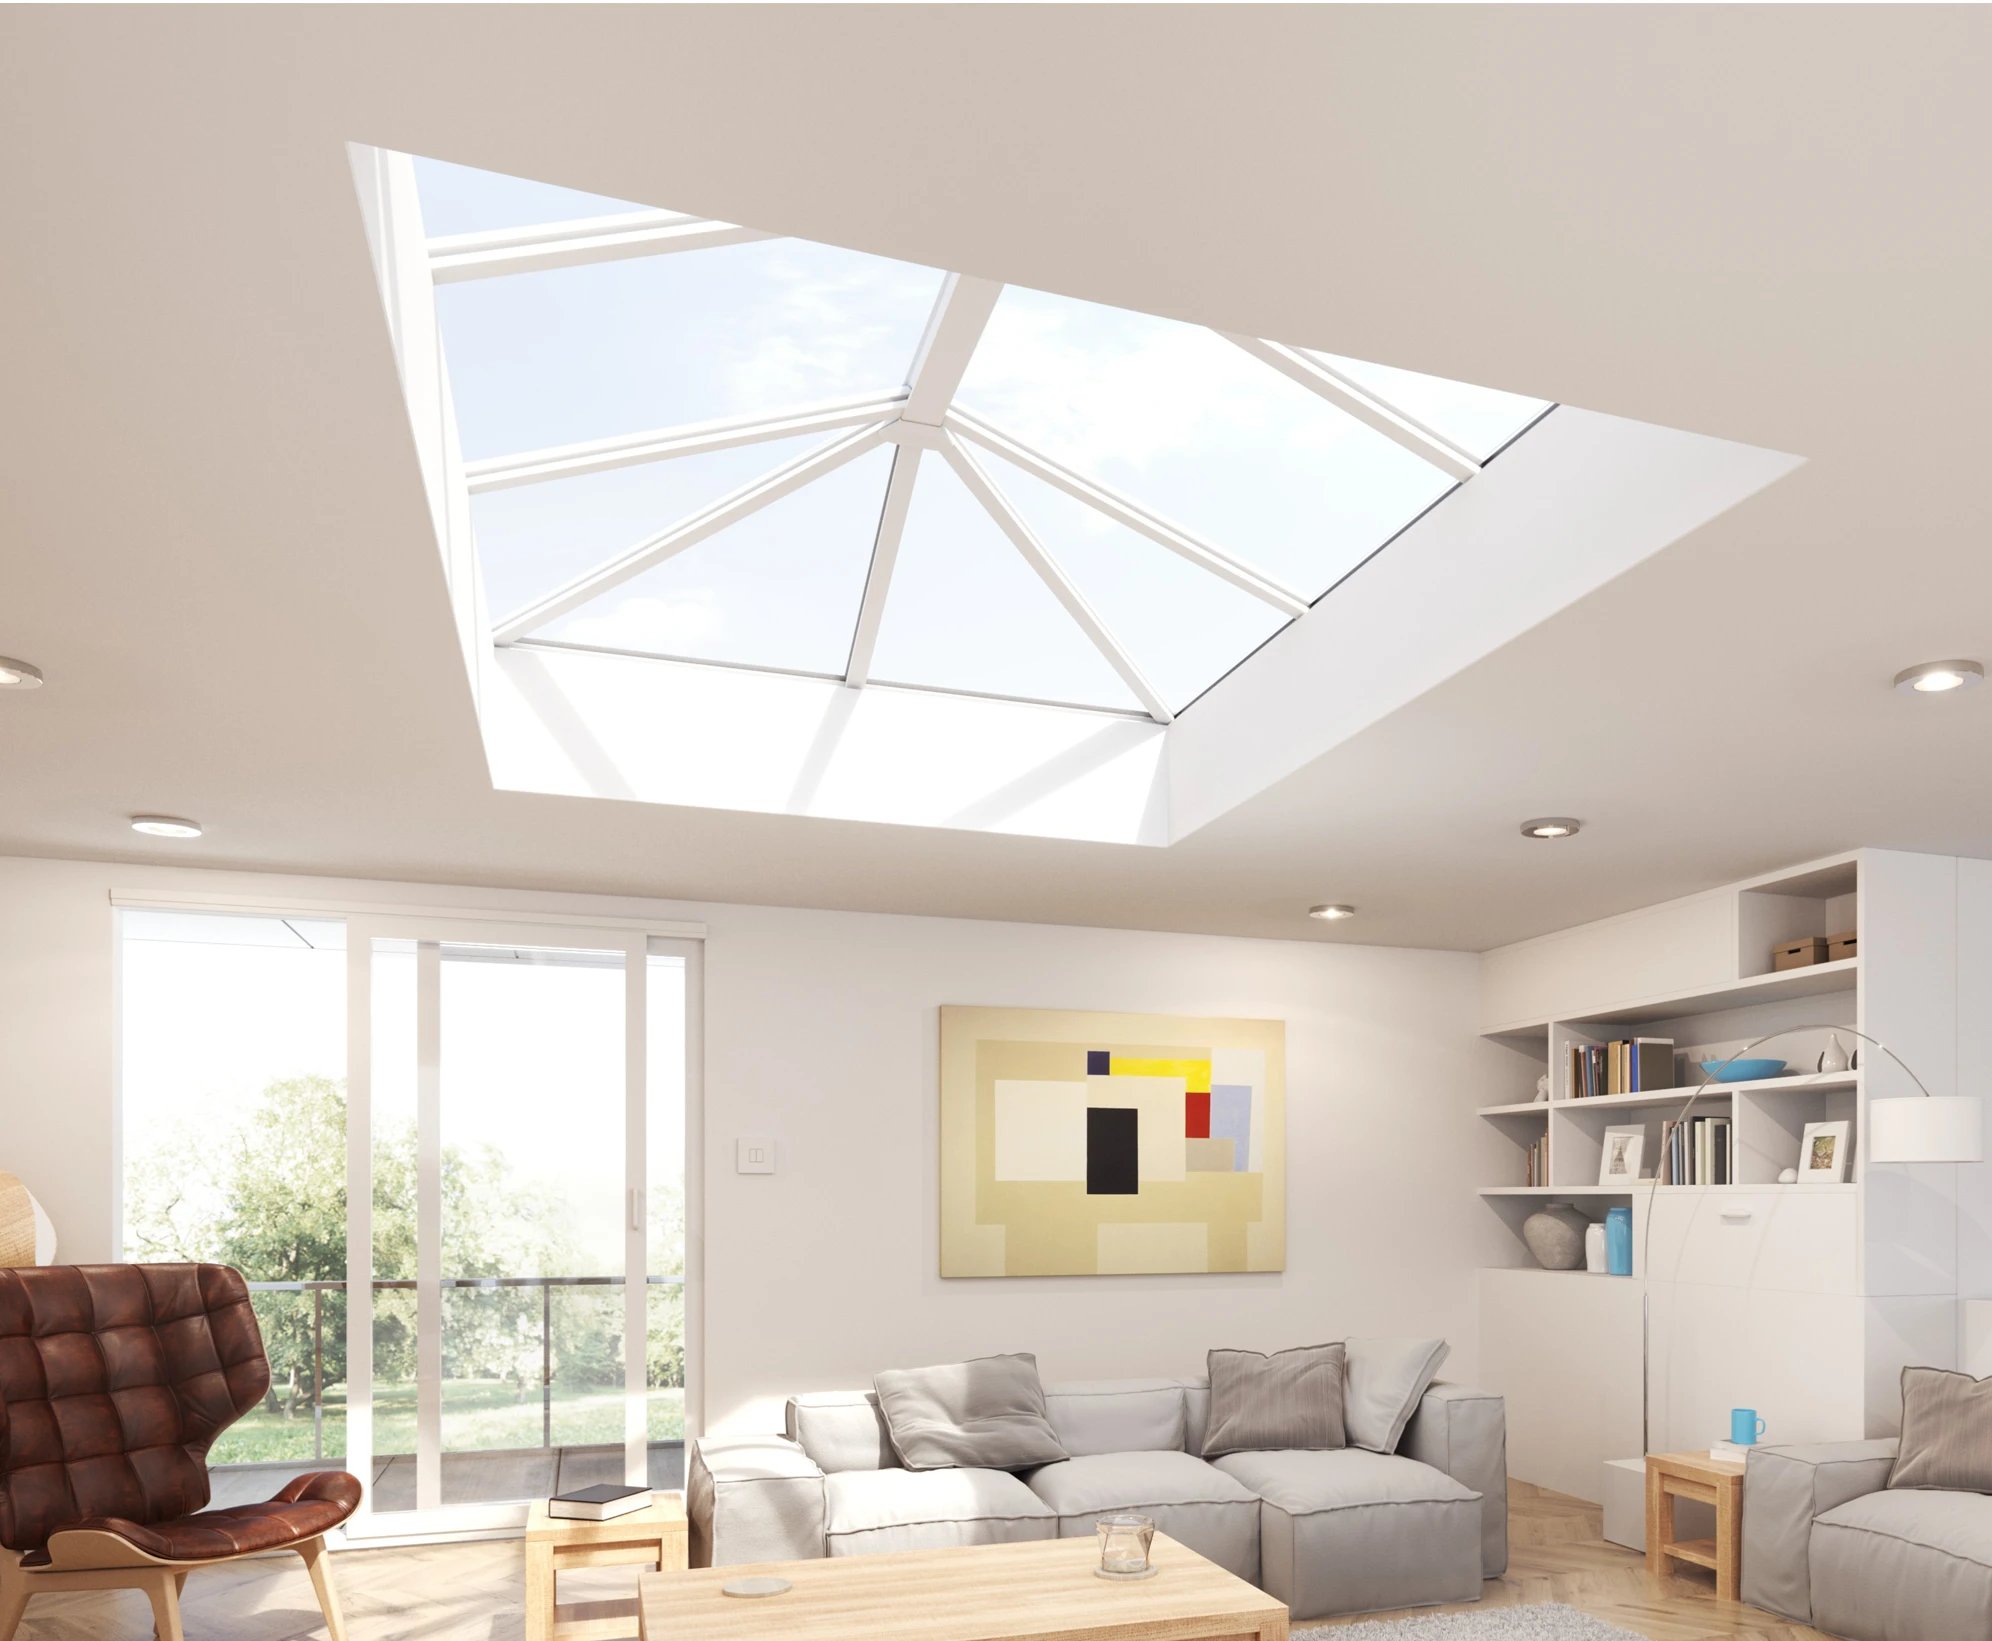 Mazuli Roof Lanterns Style and substance